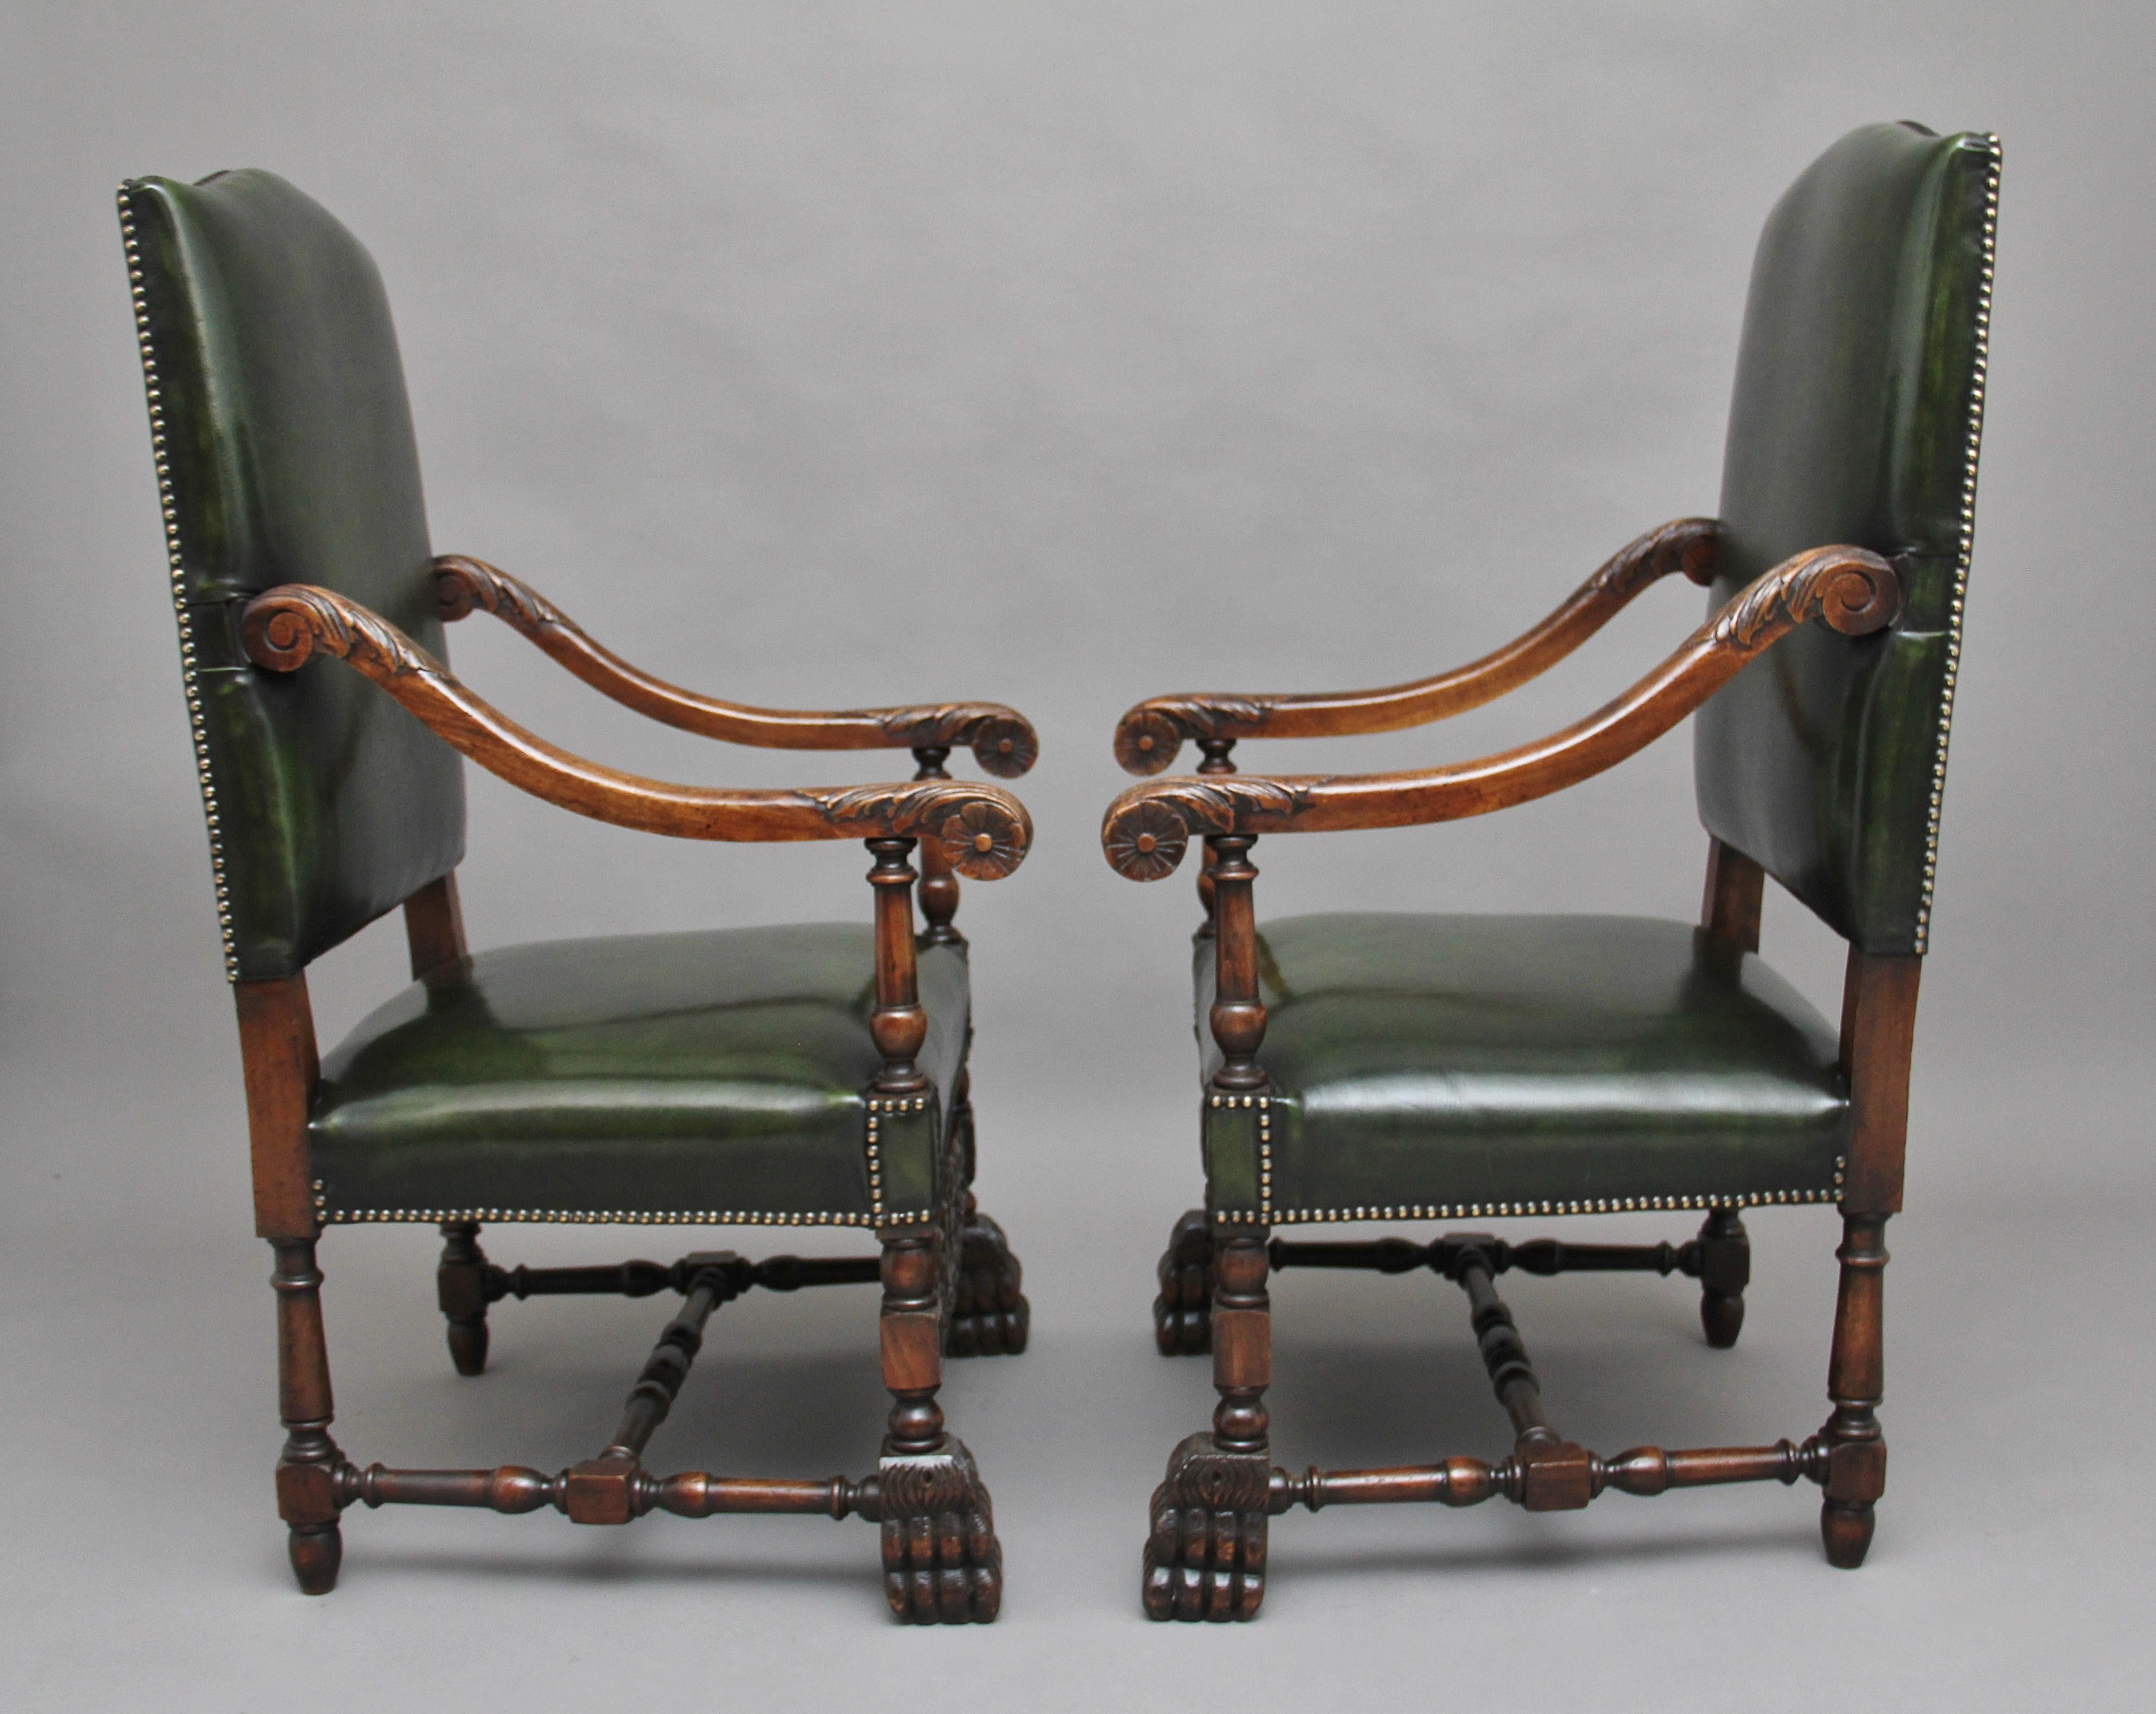 Edwardian Pair of Early 20th Century Carved Armchairs in the Carolean Style